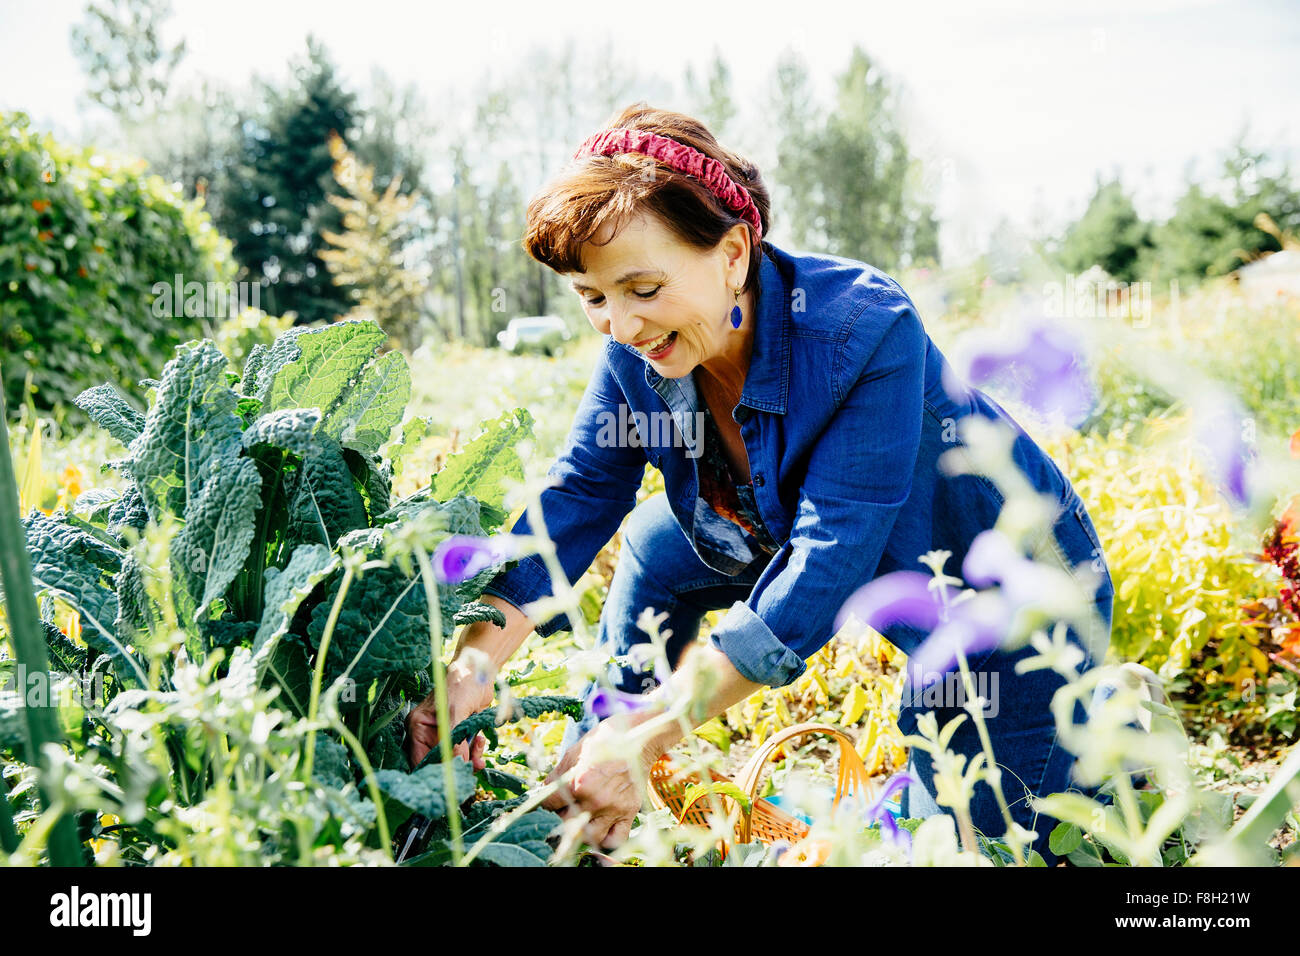 Caucasian Woman picking vegetables in garden Banque D'Images